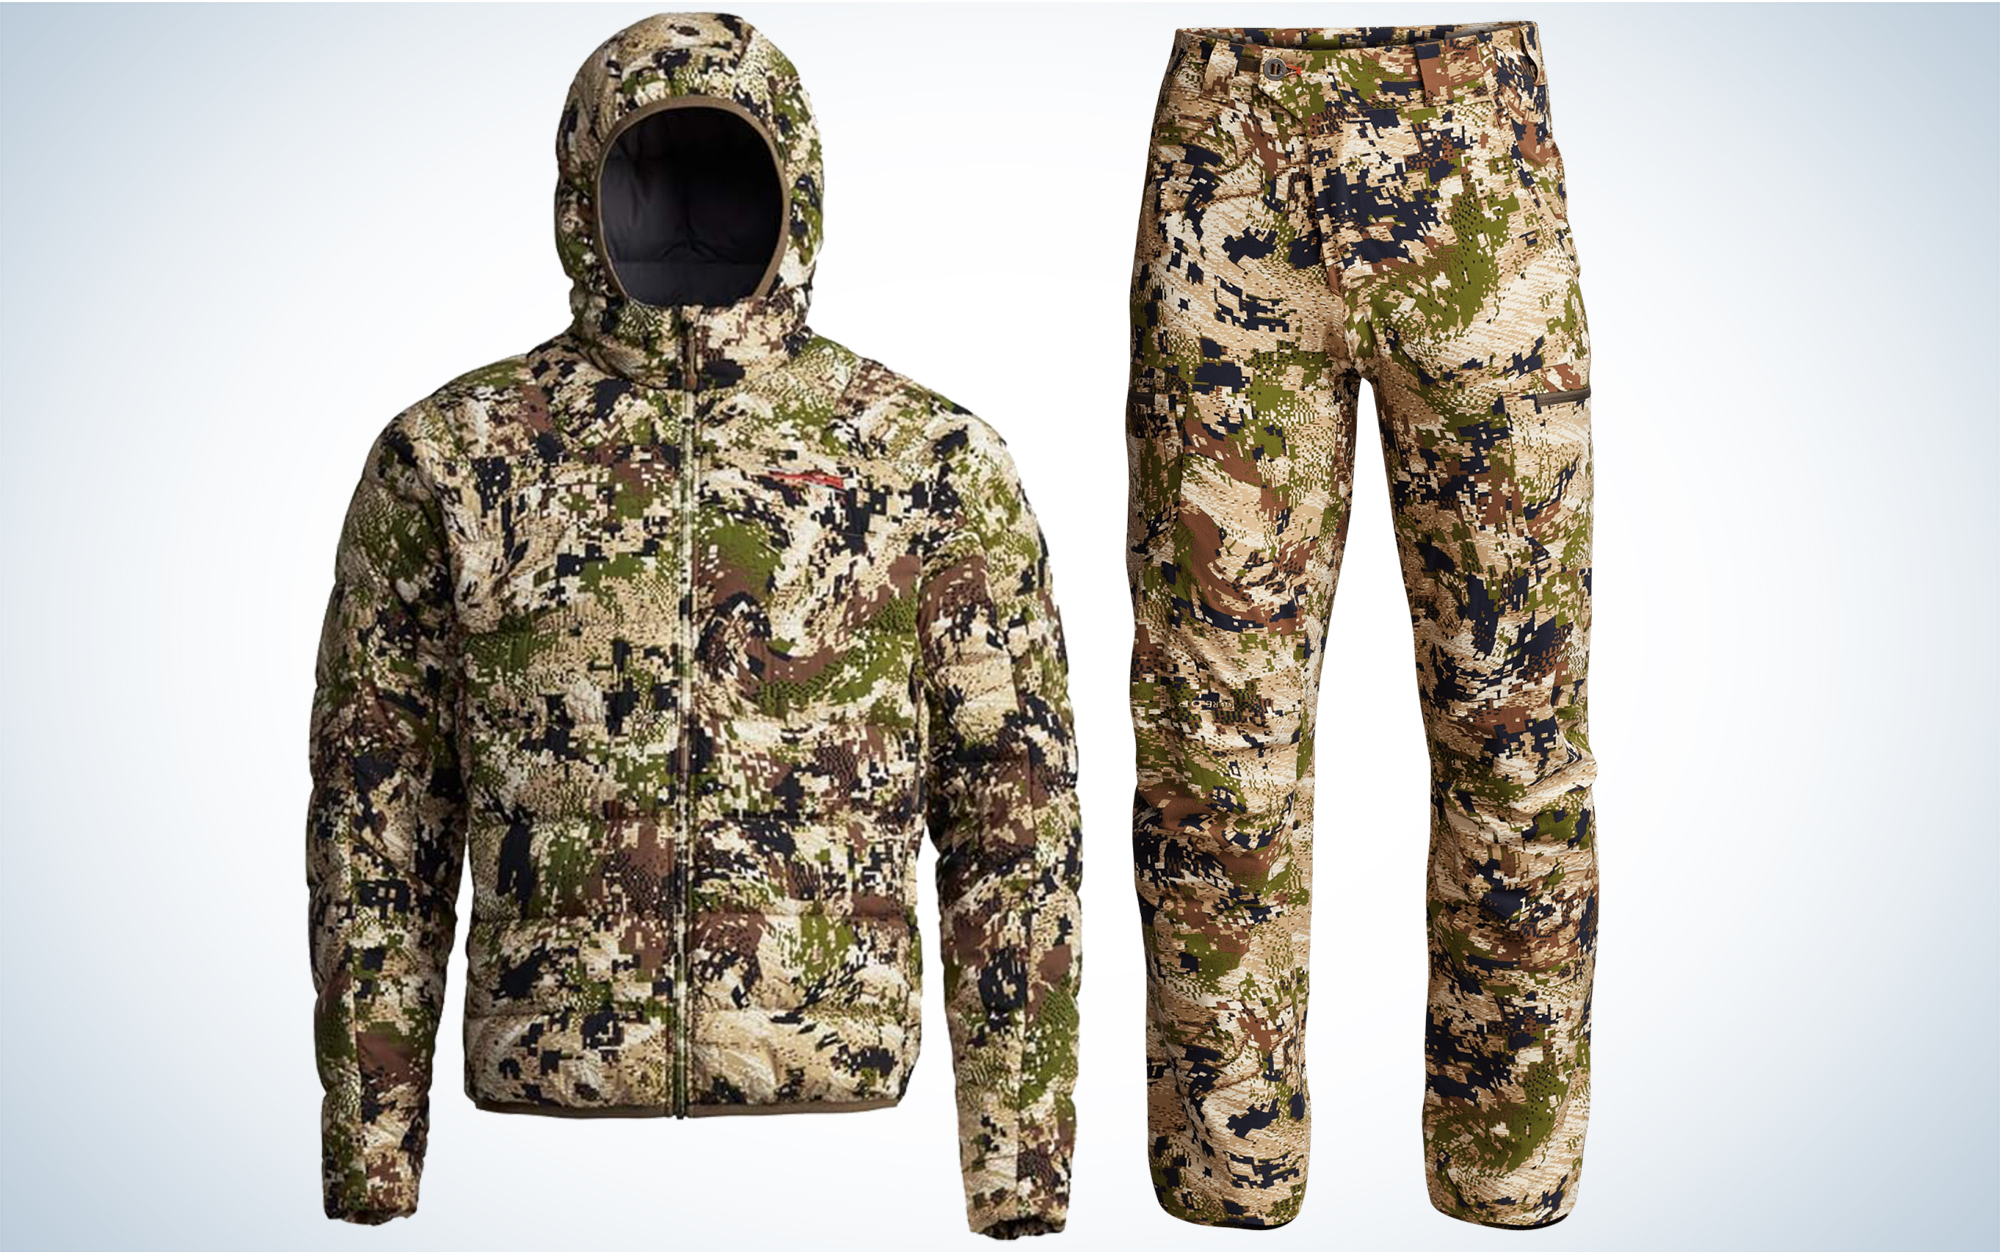 The Sitka Kelvin Lite Down Jacket and Ascent Pant are the best elk hunting apparel.